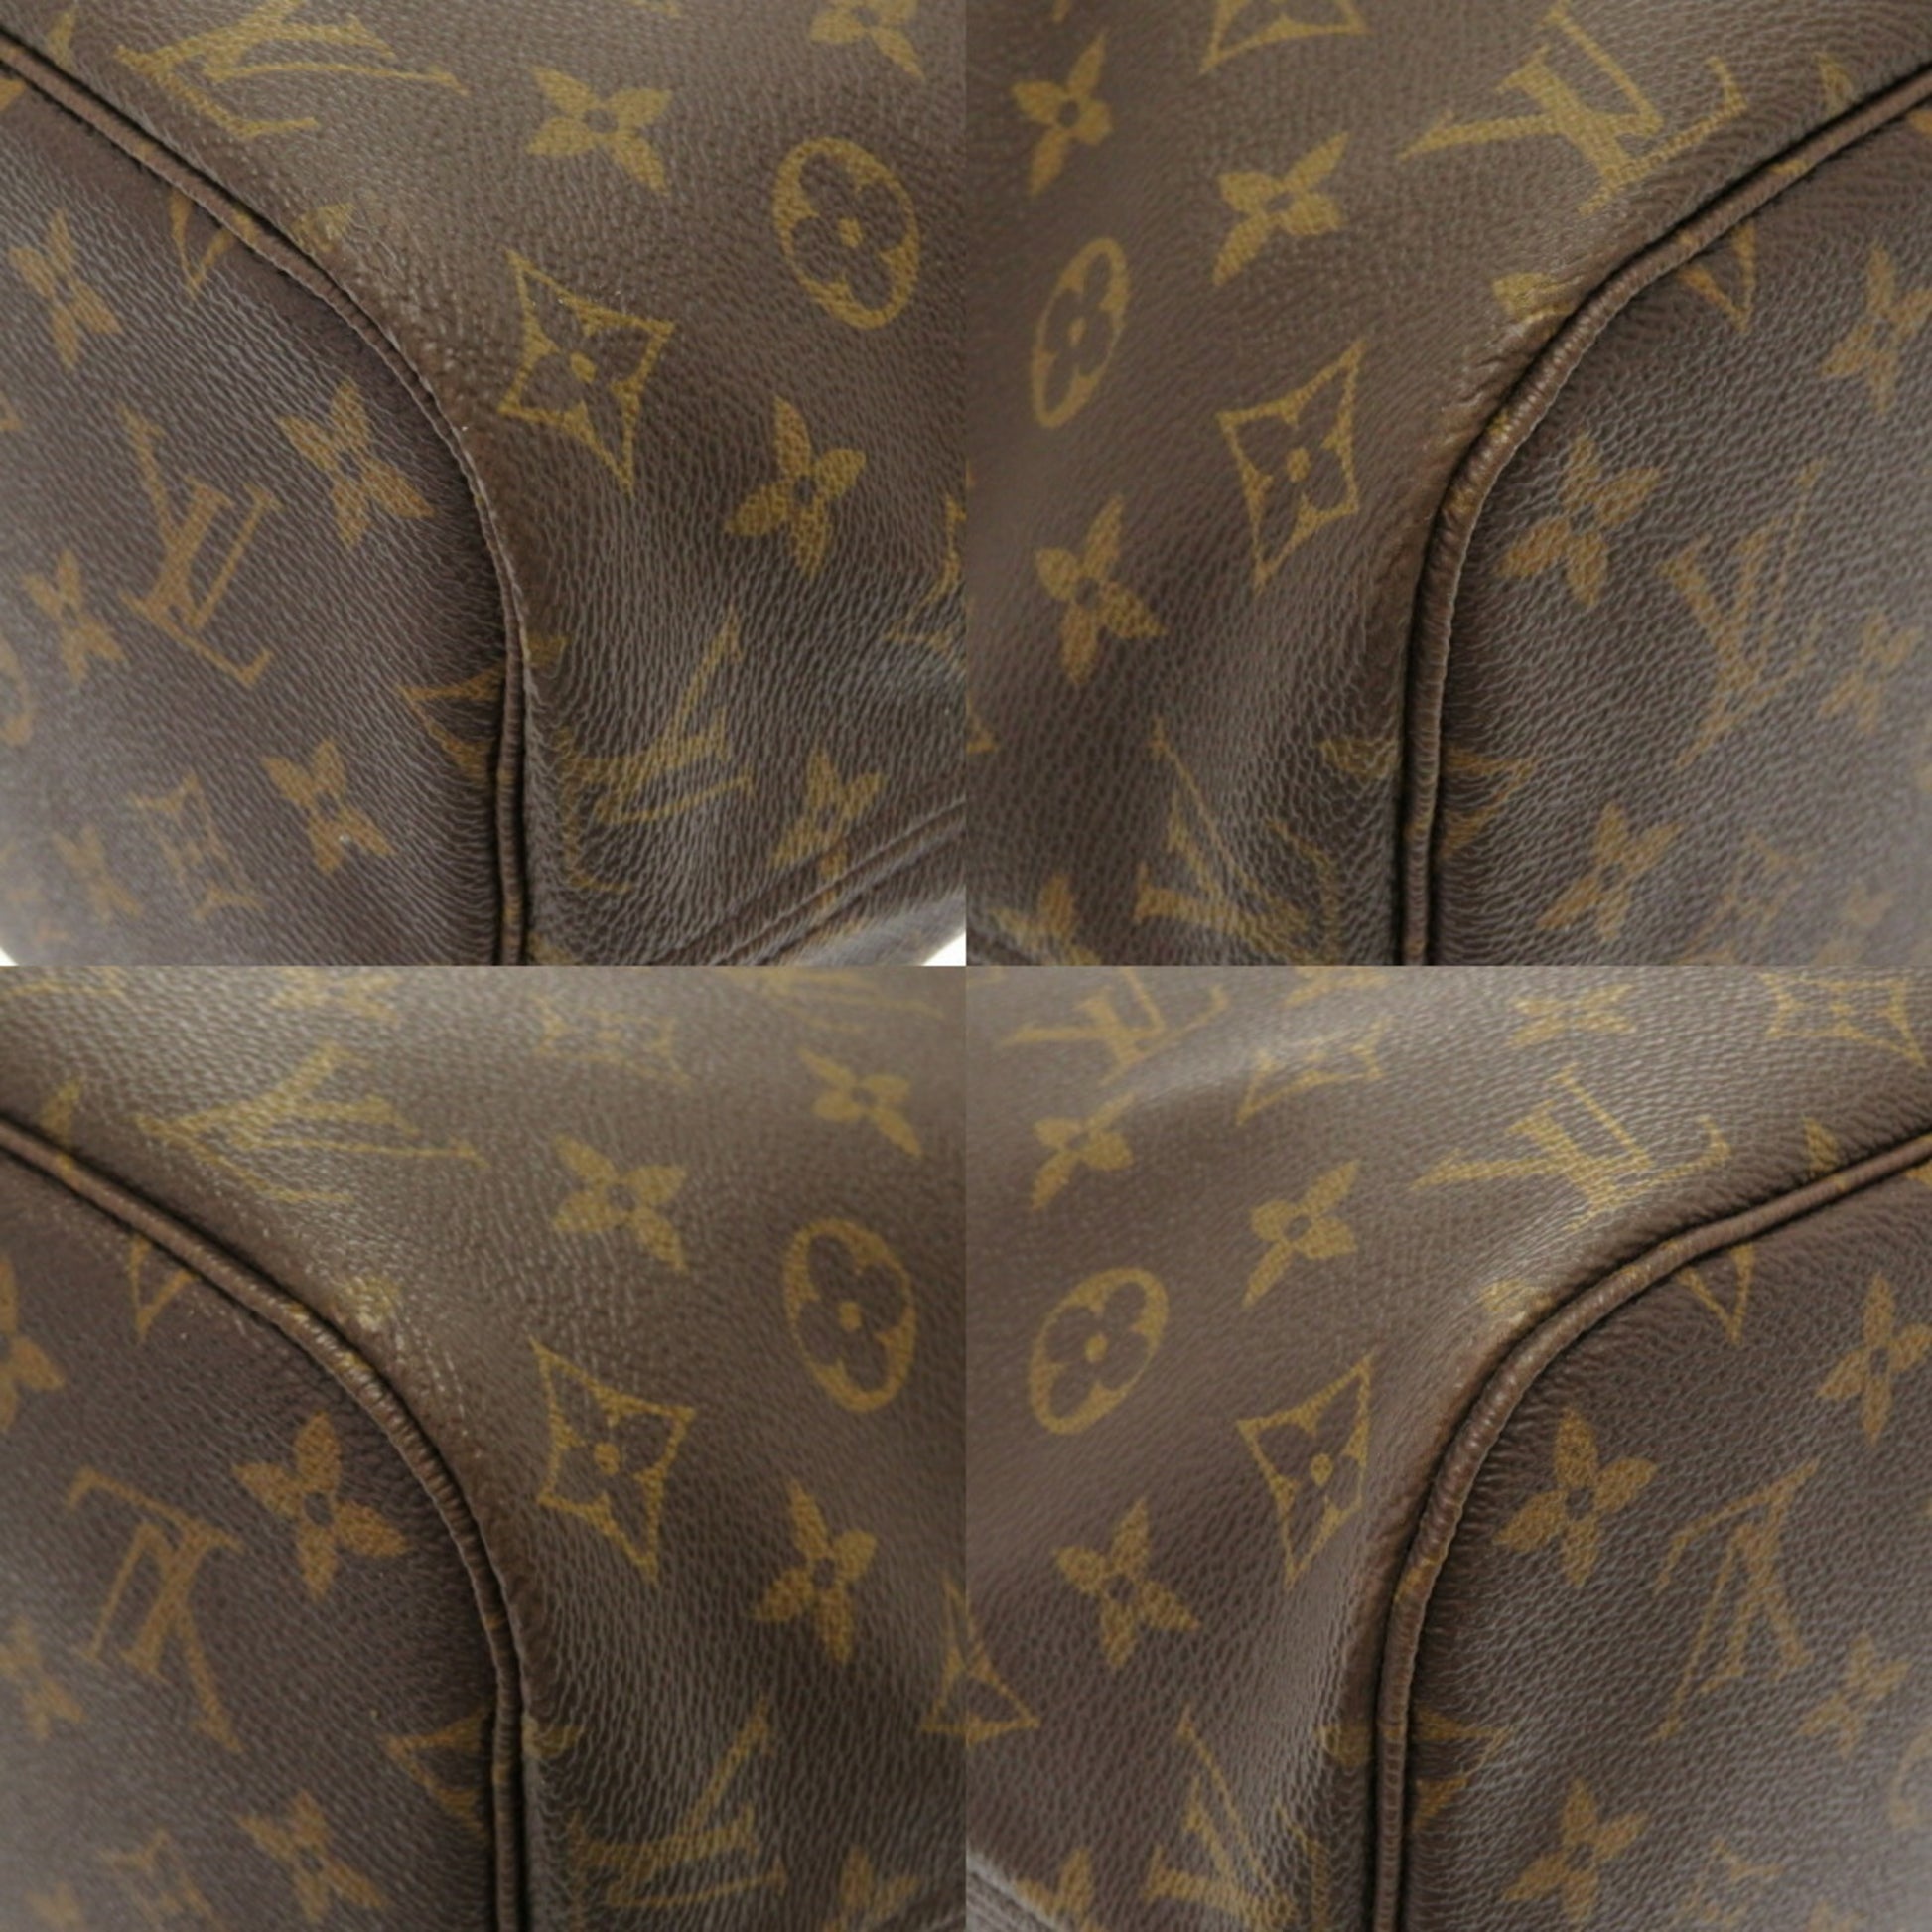 Auth NCB01 Louis Vuitton Monogram Neverfull MM M40156 Tote Bag from Japan